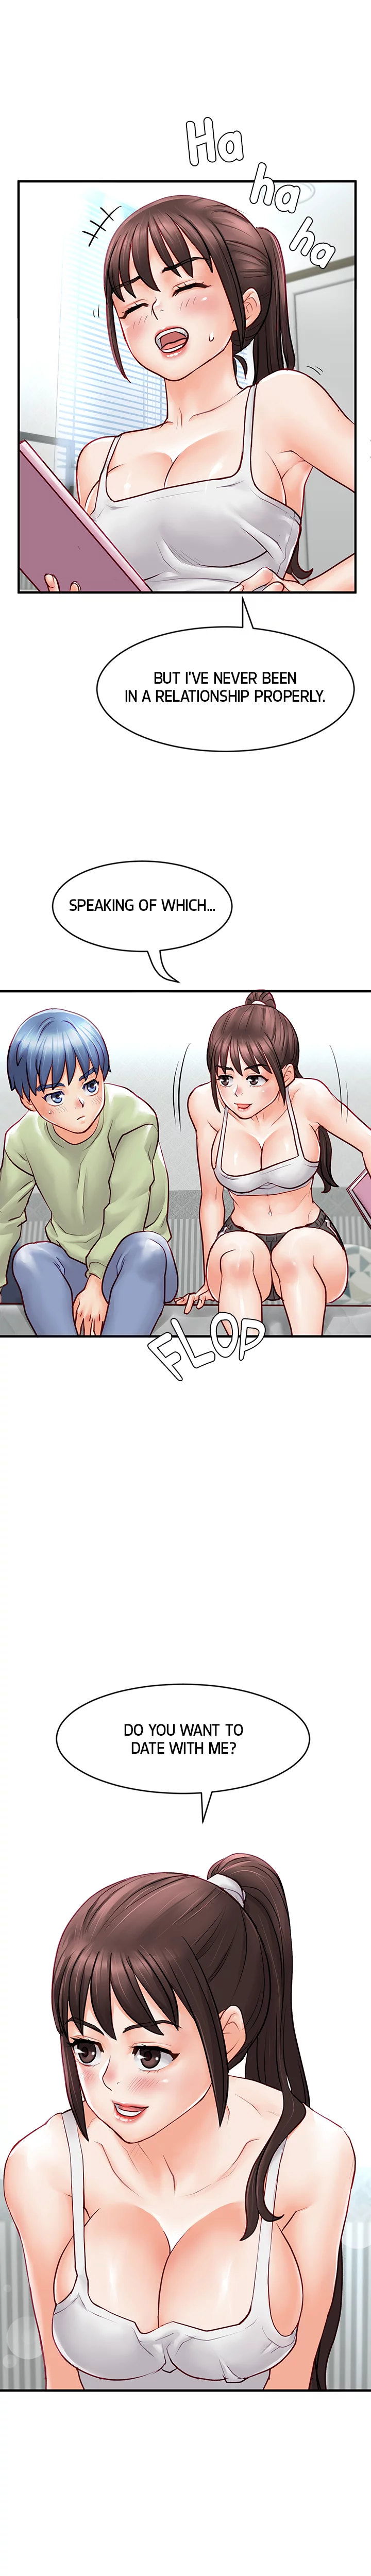 love-is-on-the-air-chap-3-11